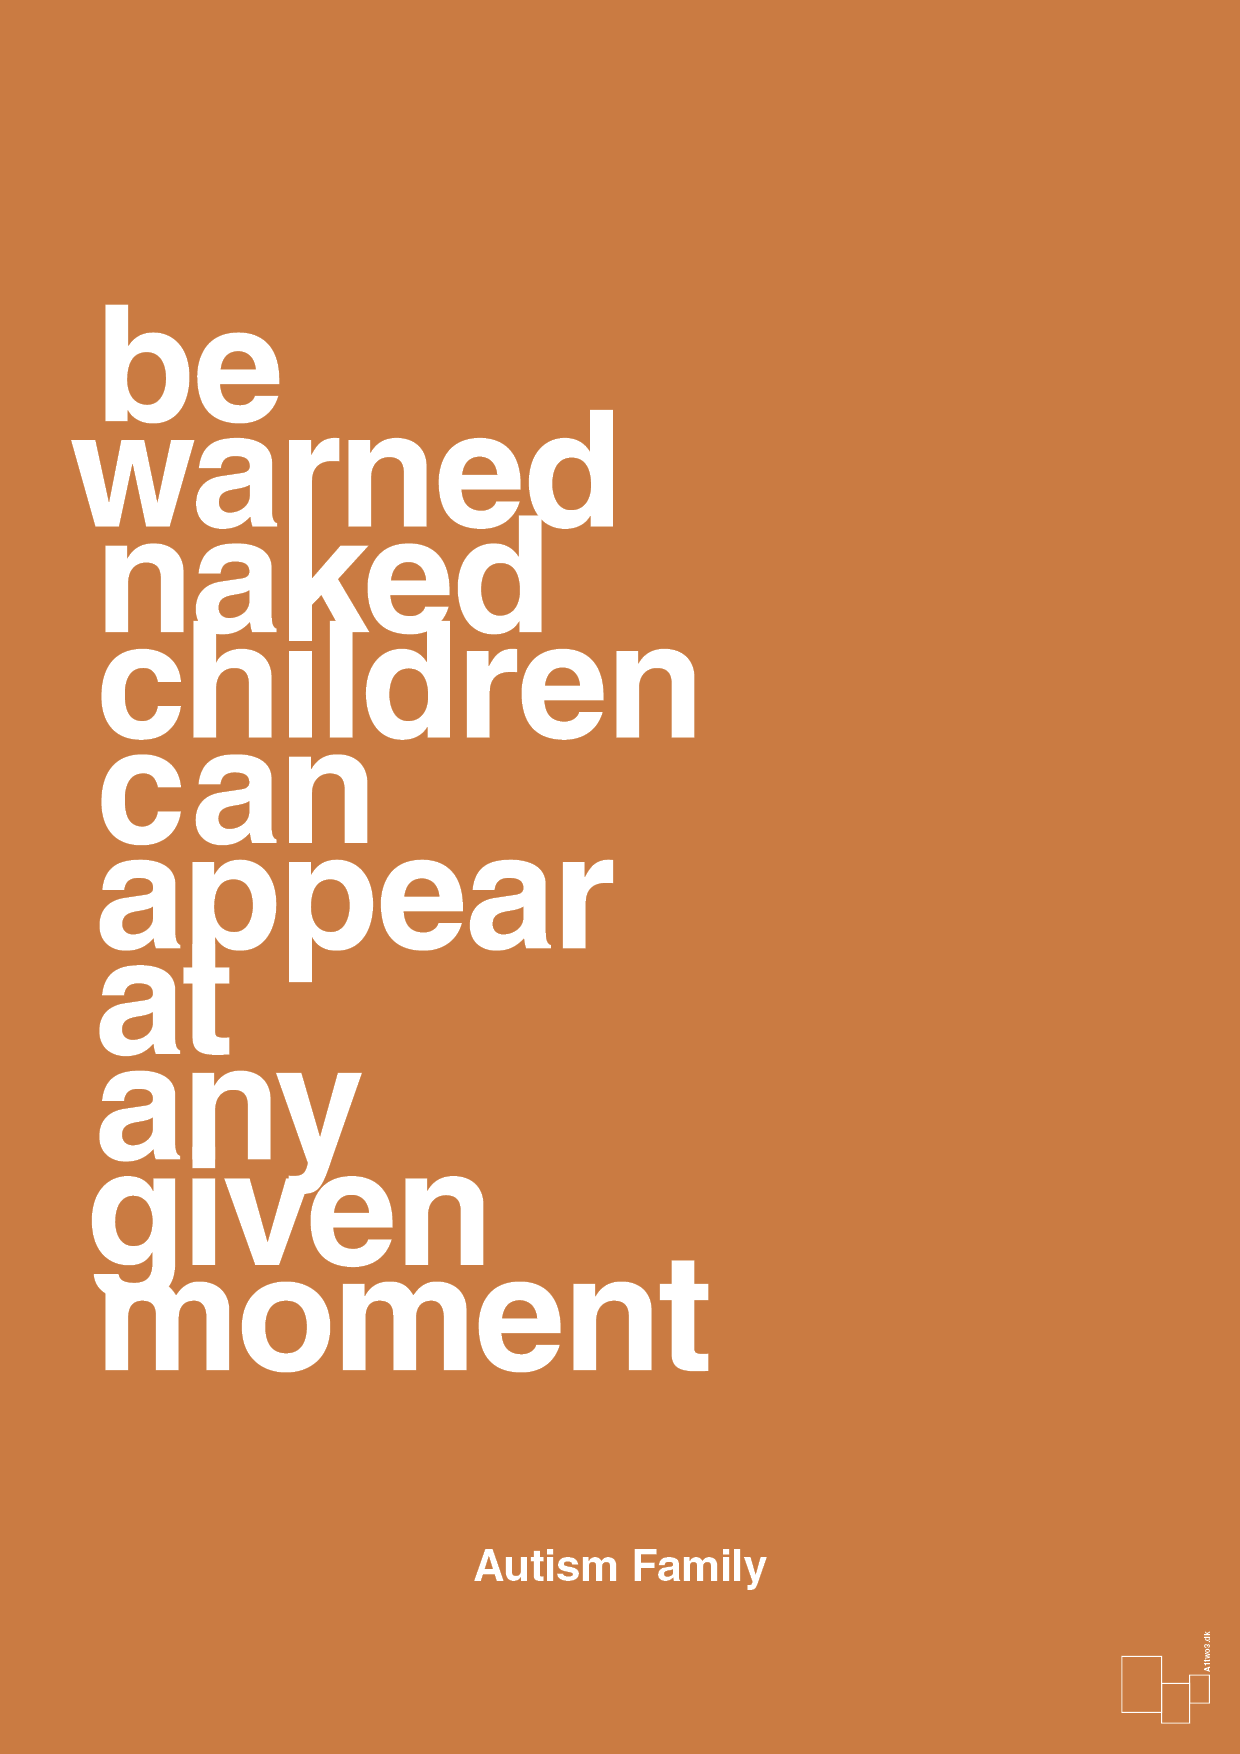 be warned naked children can appear at any given moment - Plakat med Samfund i Rumba Orange